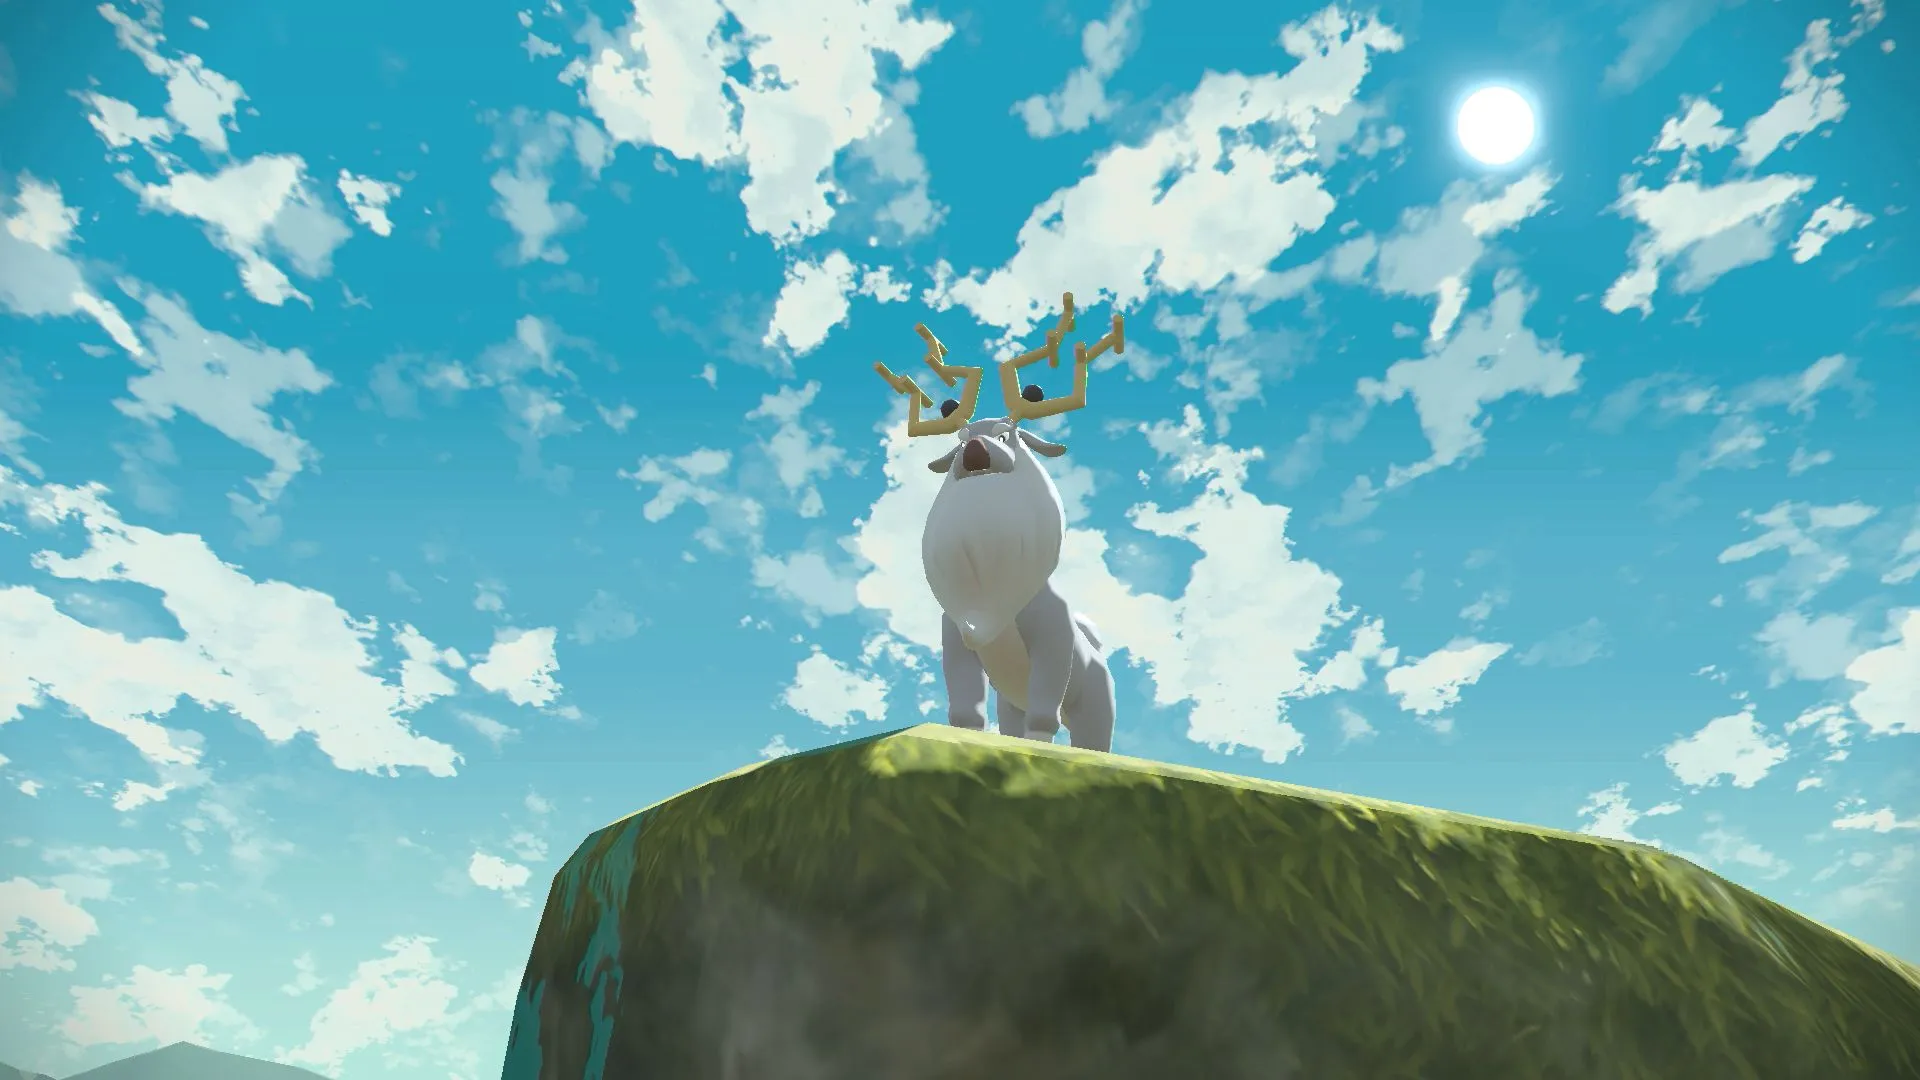 Pokemon Legends Arceus Wisp Locations for Eerie Apparitions in the